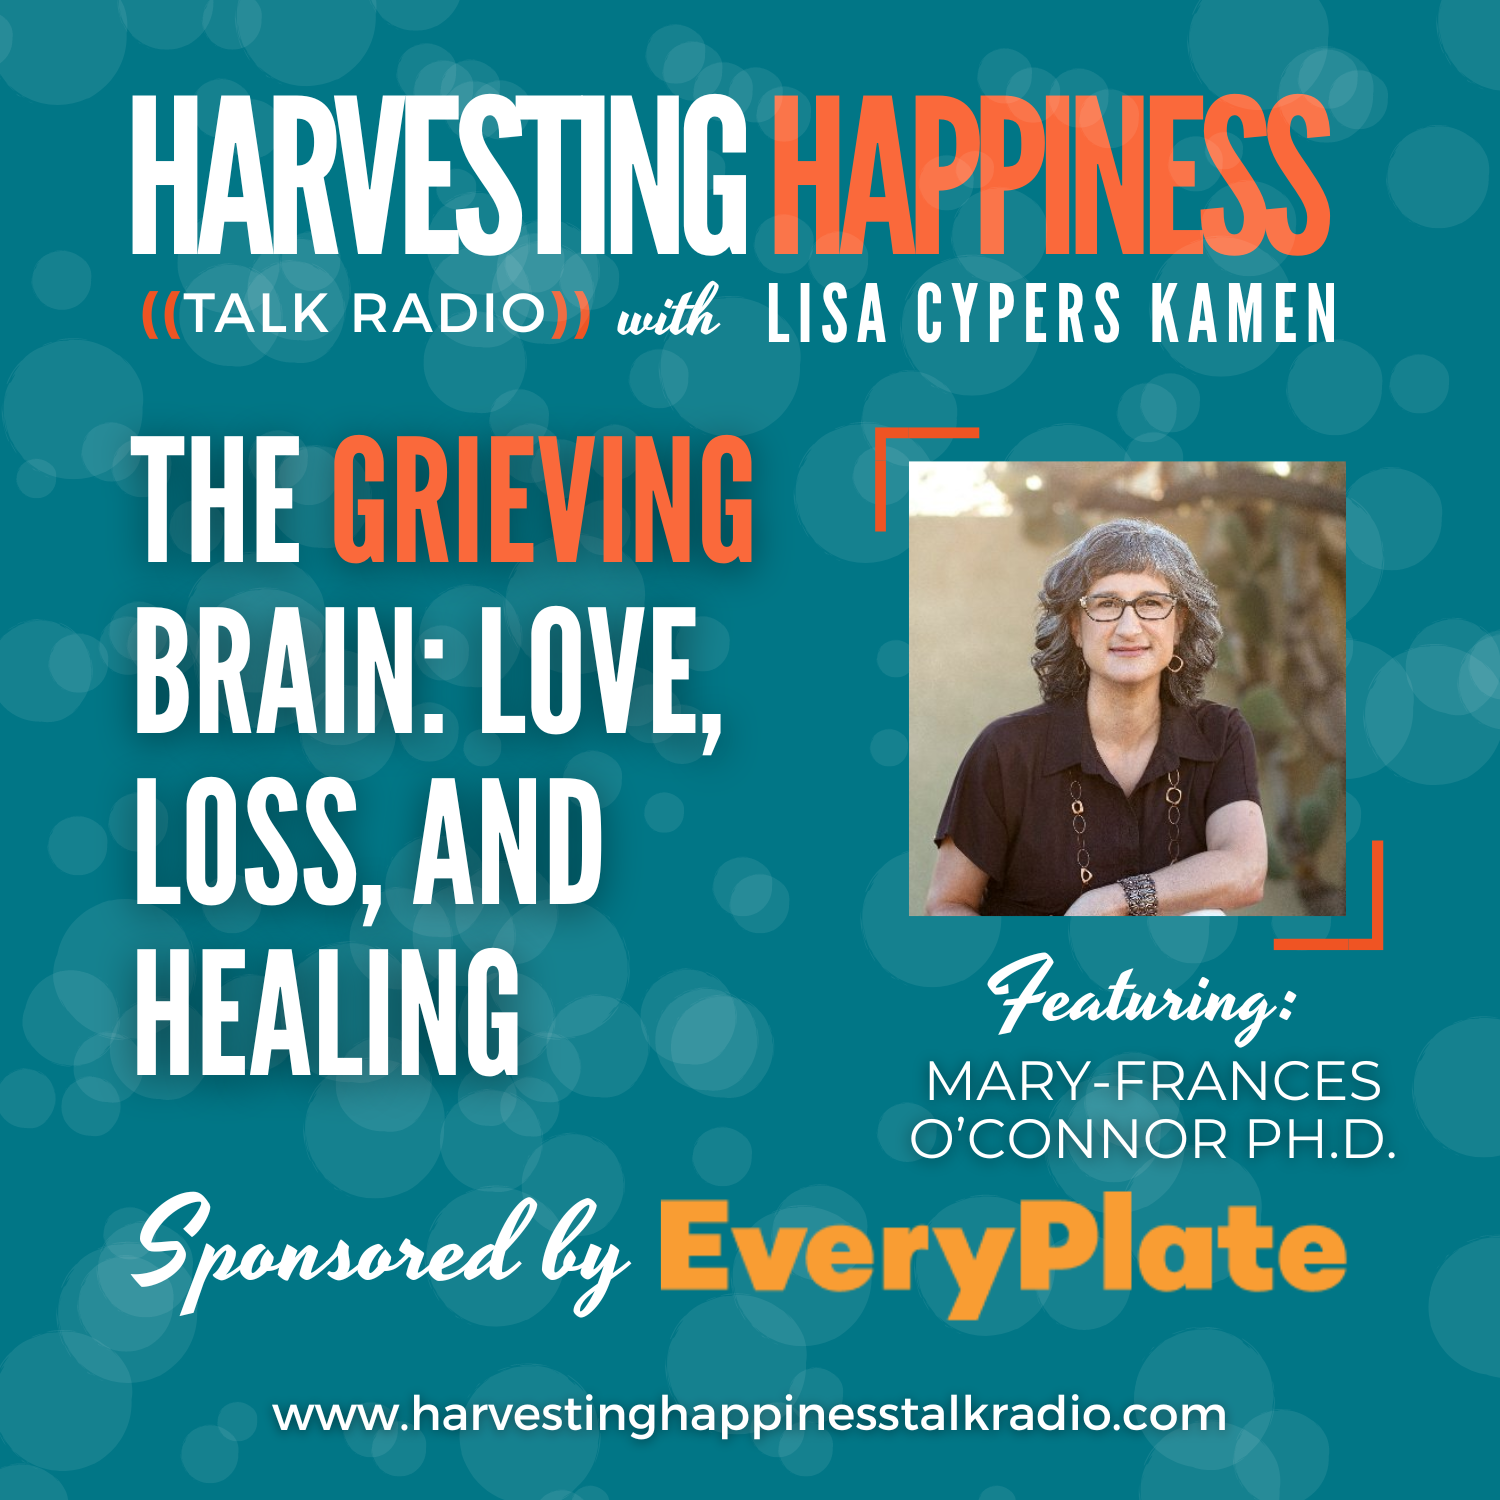 Podcats about grief and loss with Mary-Frances O'Connor PhD and Lisa Cypers Kamen